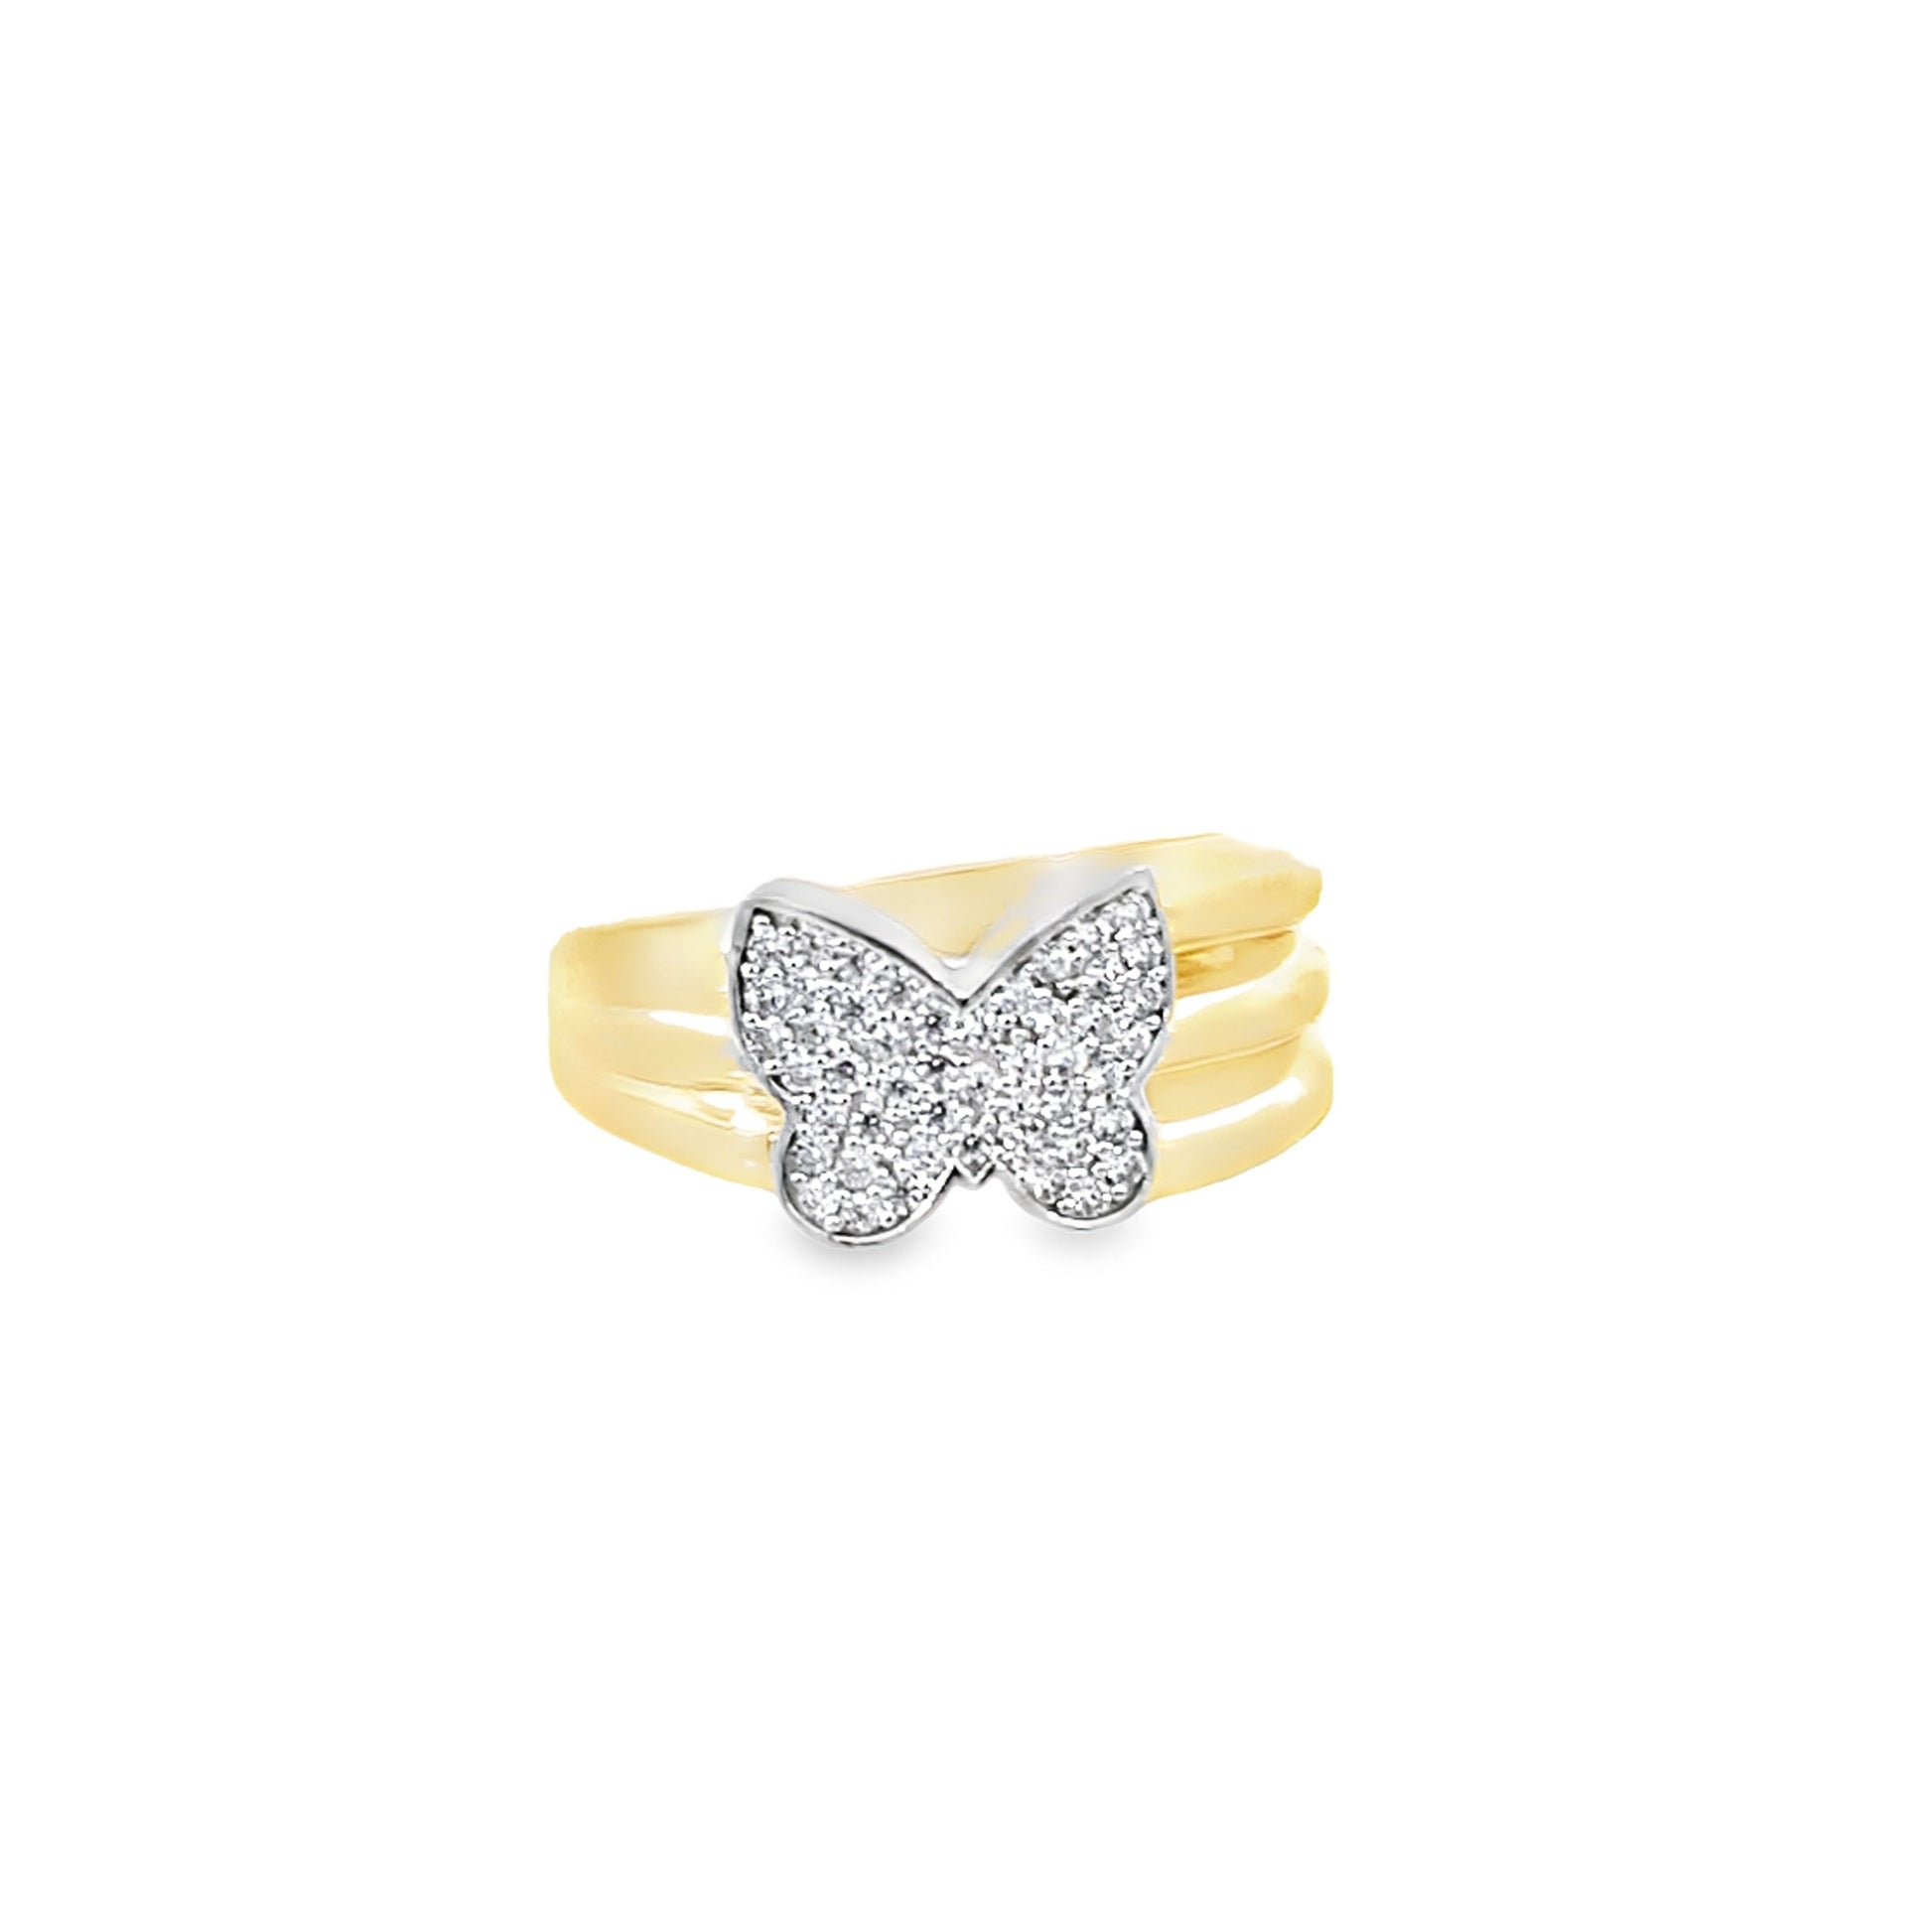 14K Yellow Gold Ladies Butterfly Ring Size 6.25 2.5Dwt